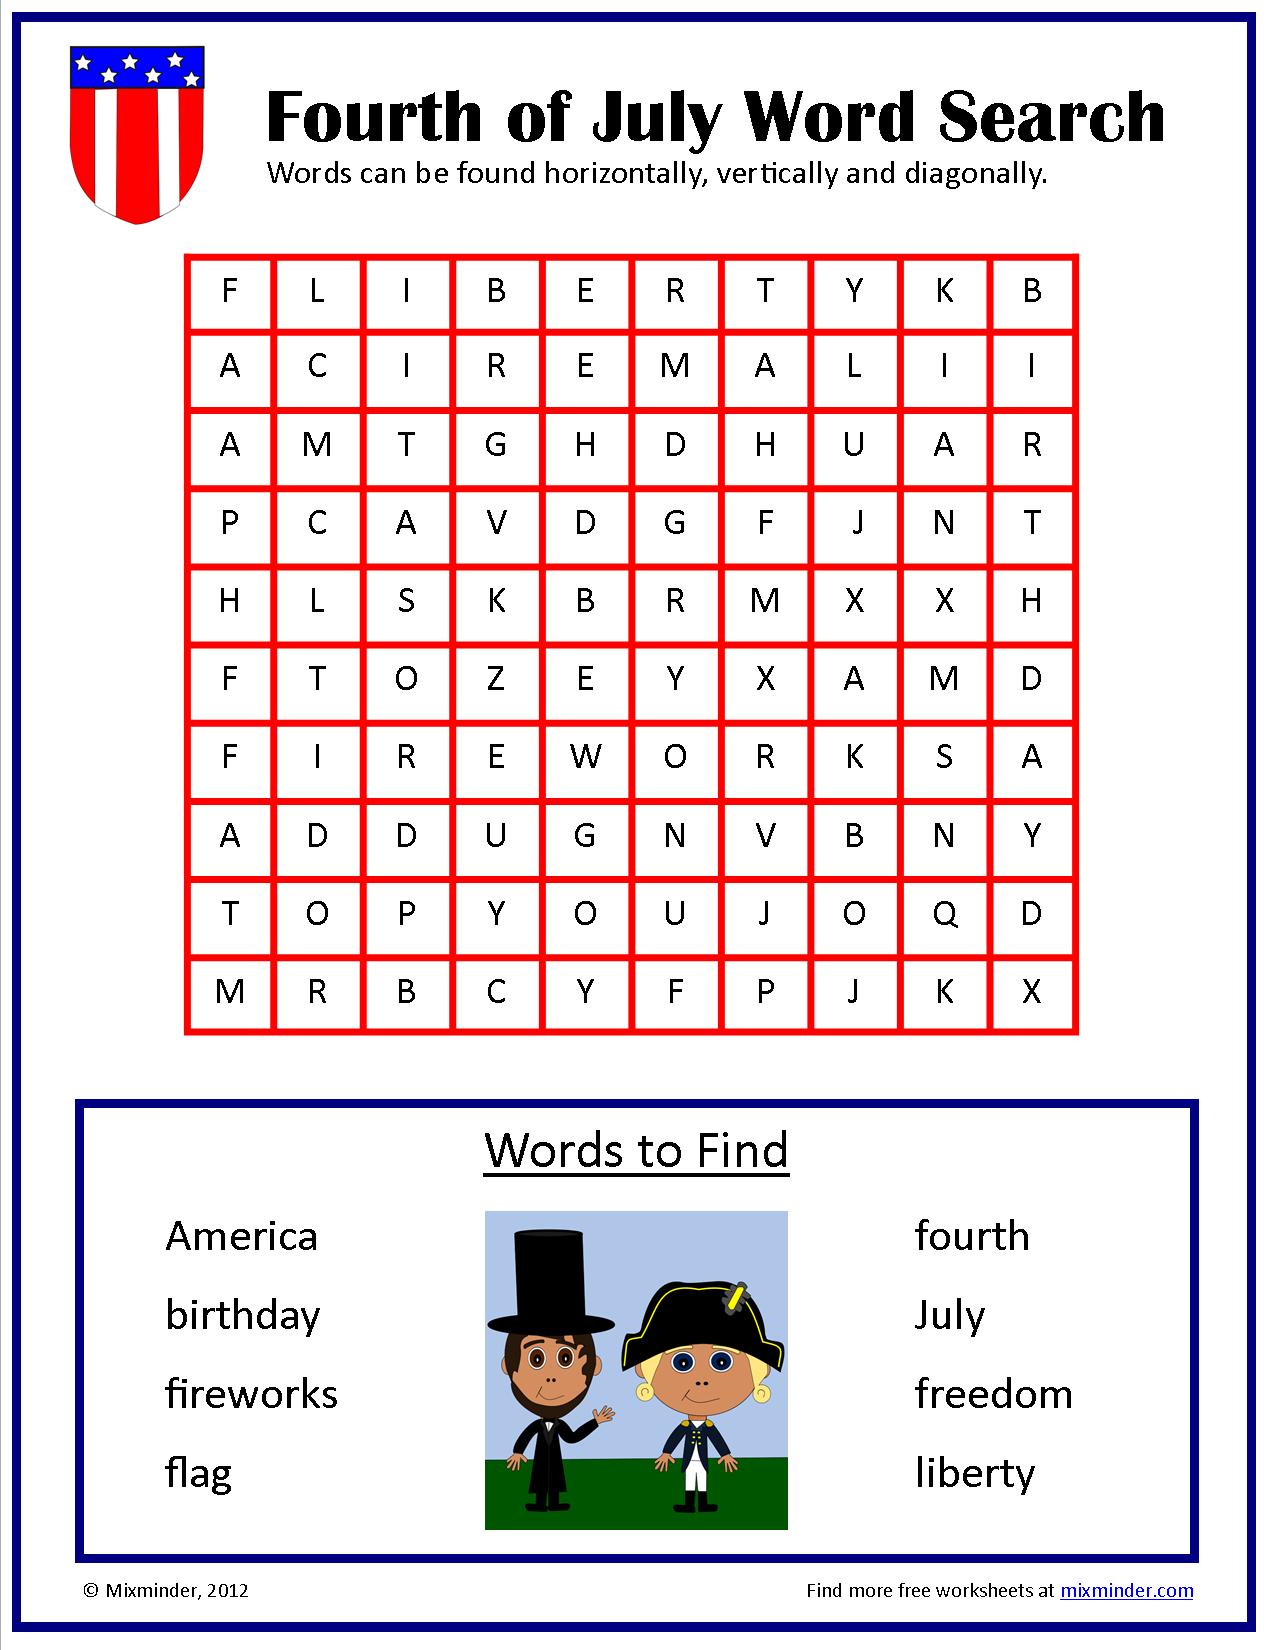 Fourth of July Word Search